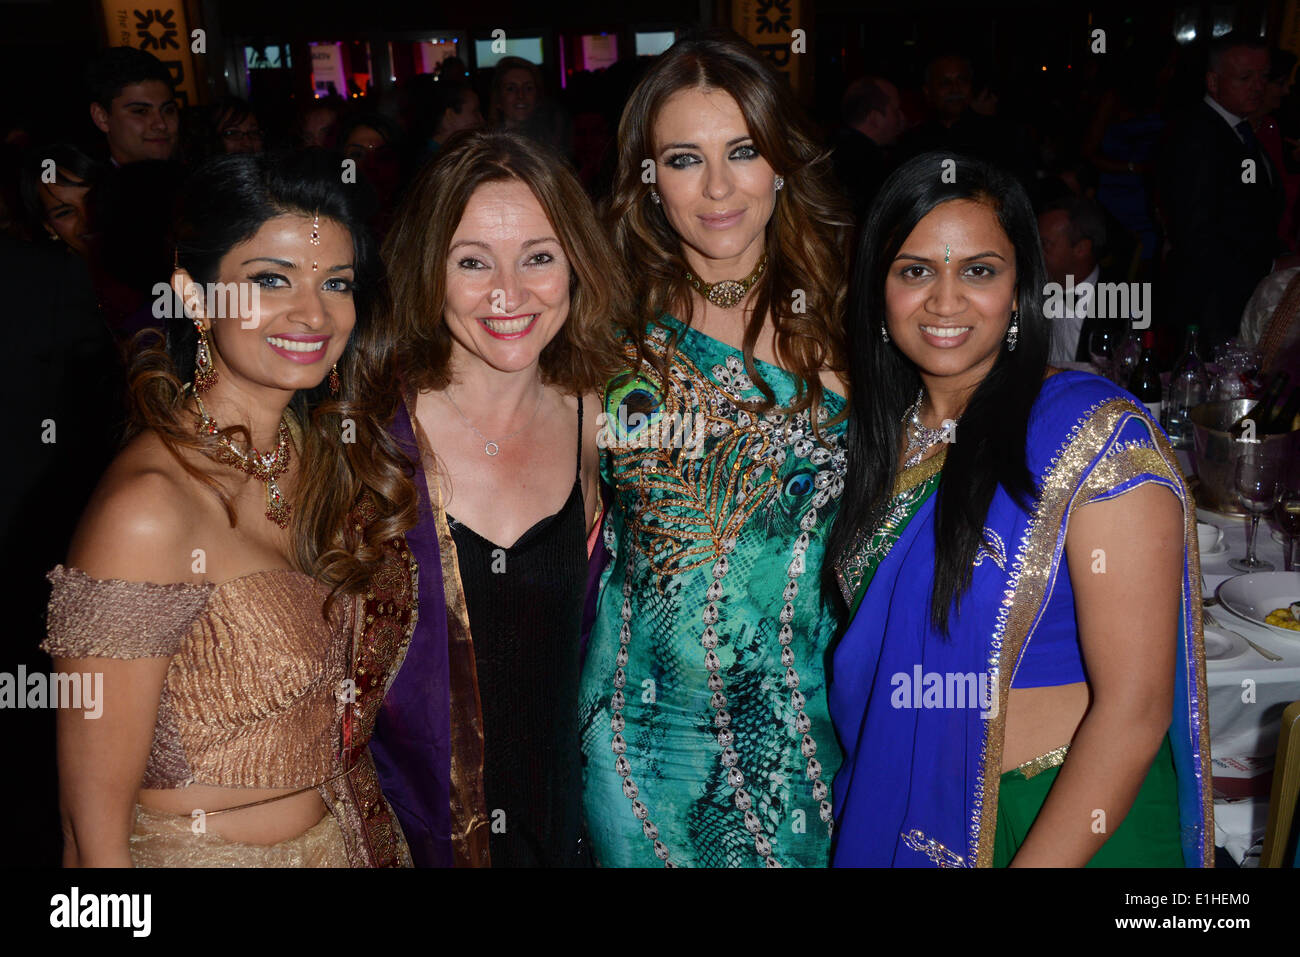 London, UK. 4th June 2014. Elizabeth Hurley attends the Asian Women of Achievement Awards at the London Hilton on Park Lane Hotel. Photo by See li Credit:  See Li/Alamy Live News Stock Photo